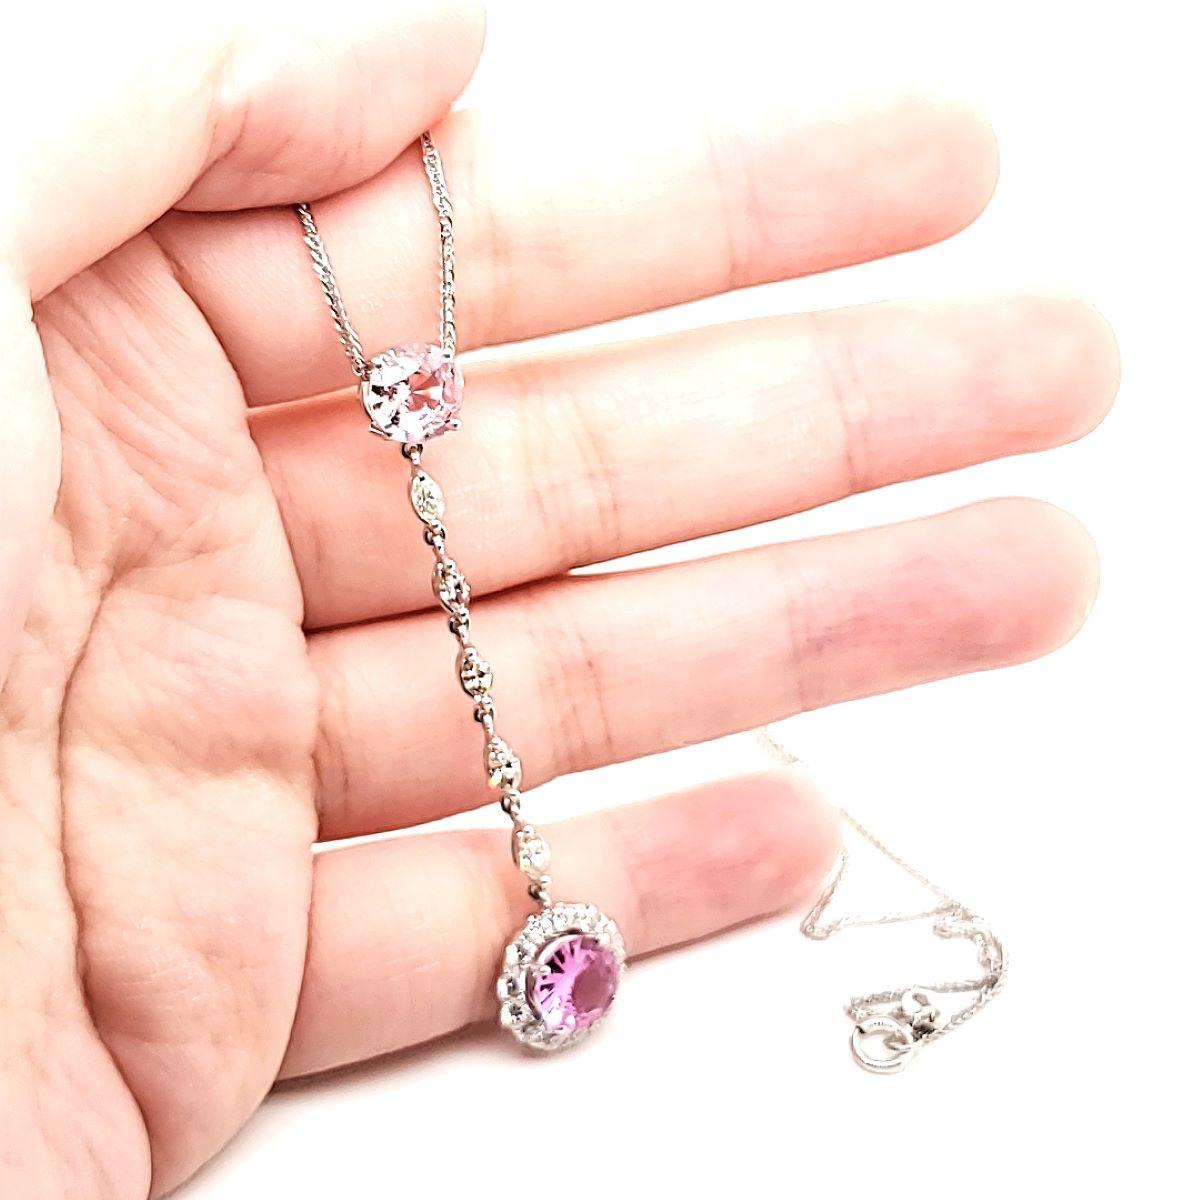 Pink Sapphire Cts 2.44 and Marquise Diamond Cts 0.42 Drop Pendant Necklace For Sale 2